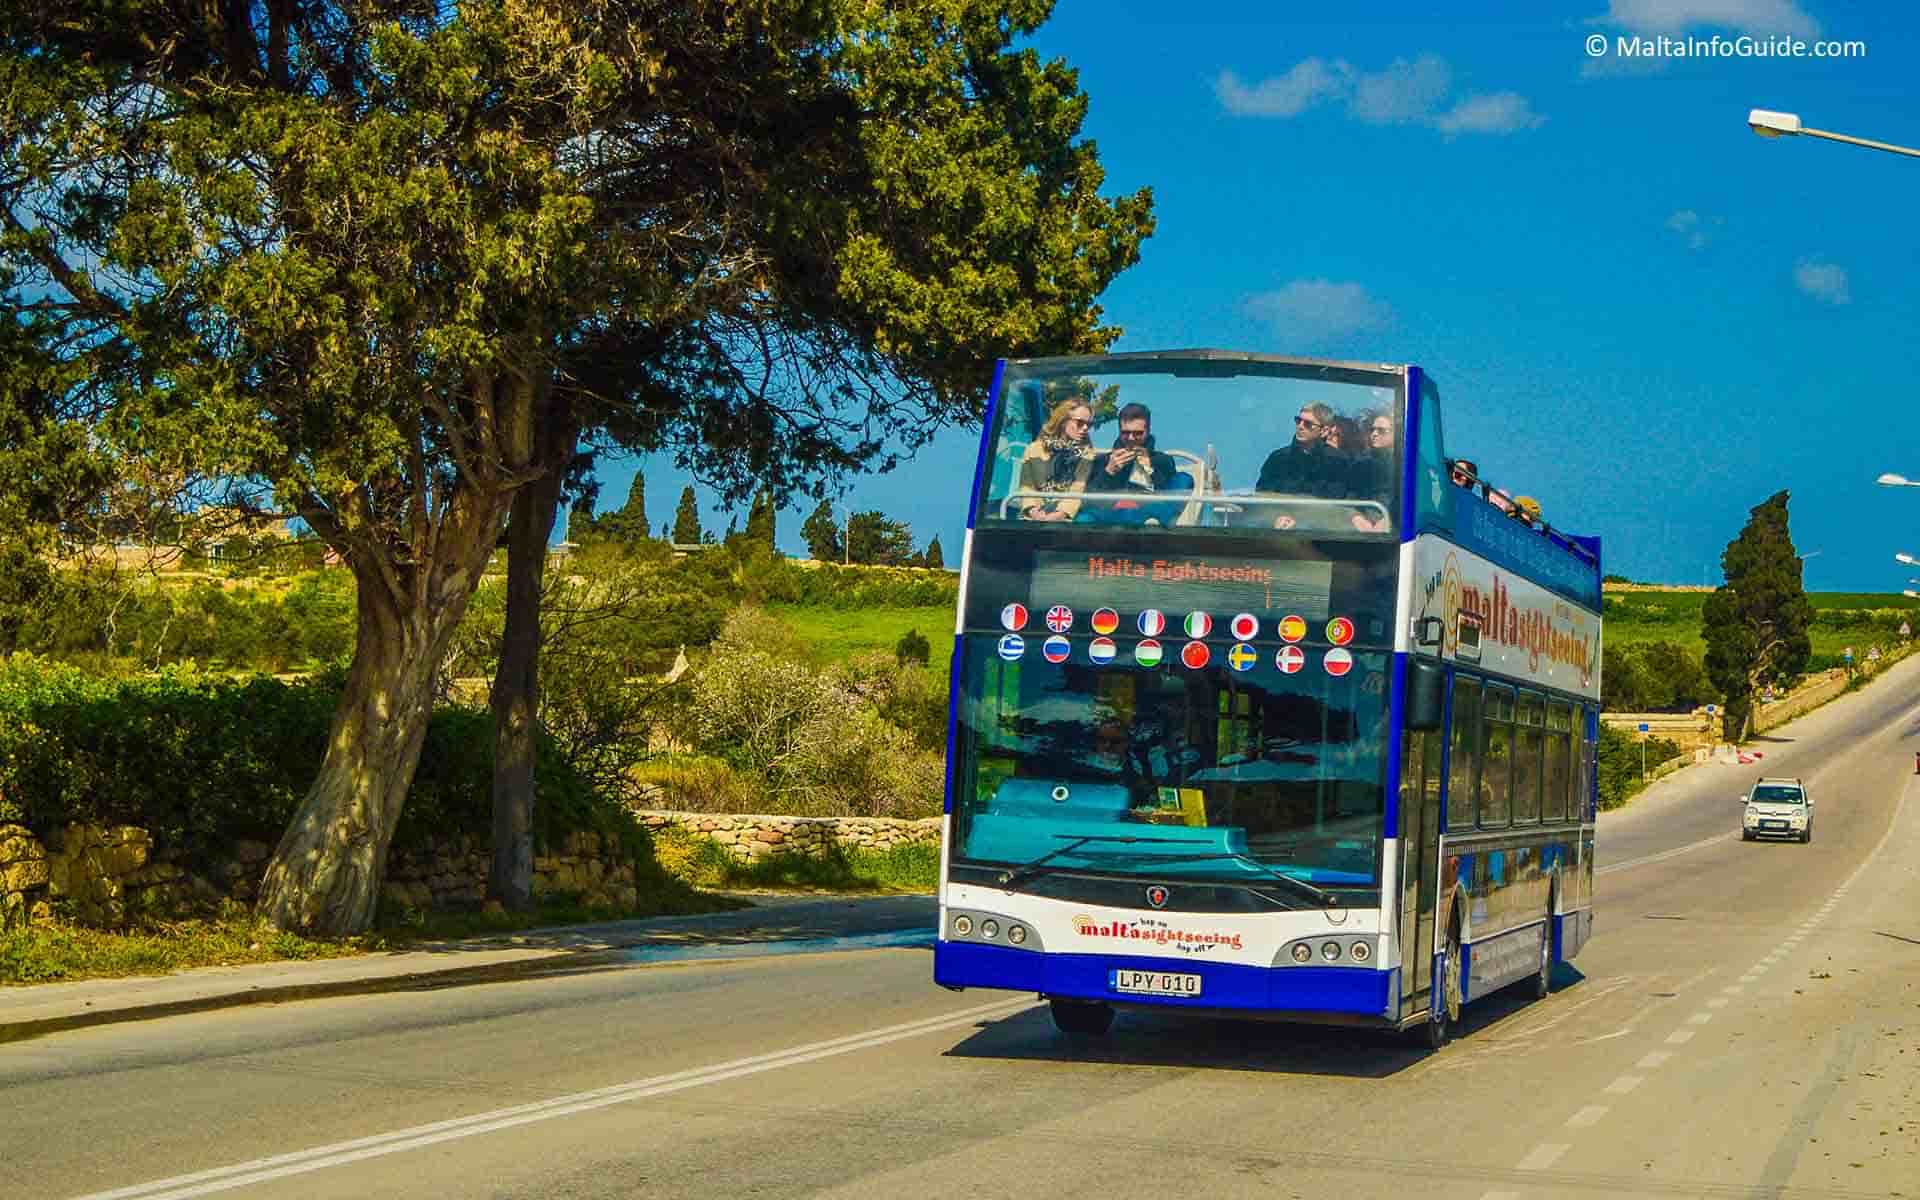 The sightseeing bus on its way to Mdina.